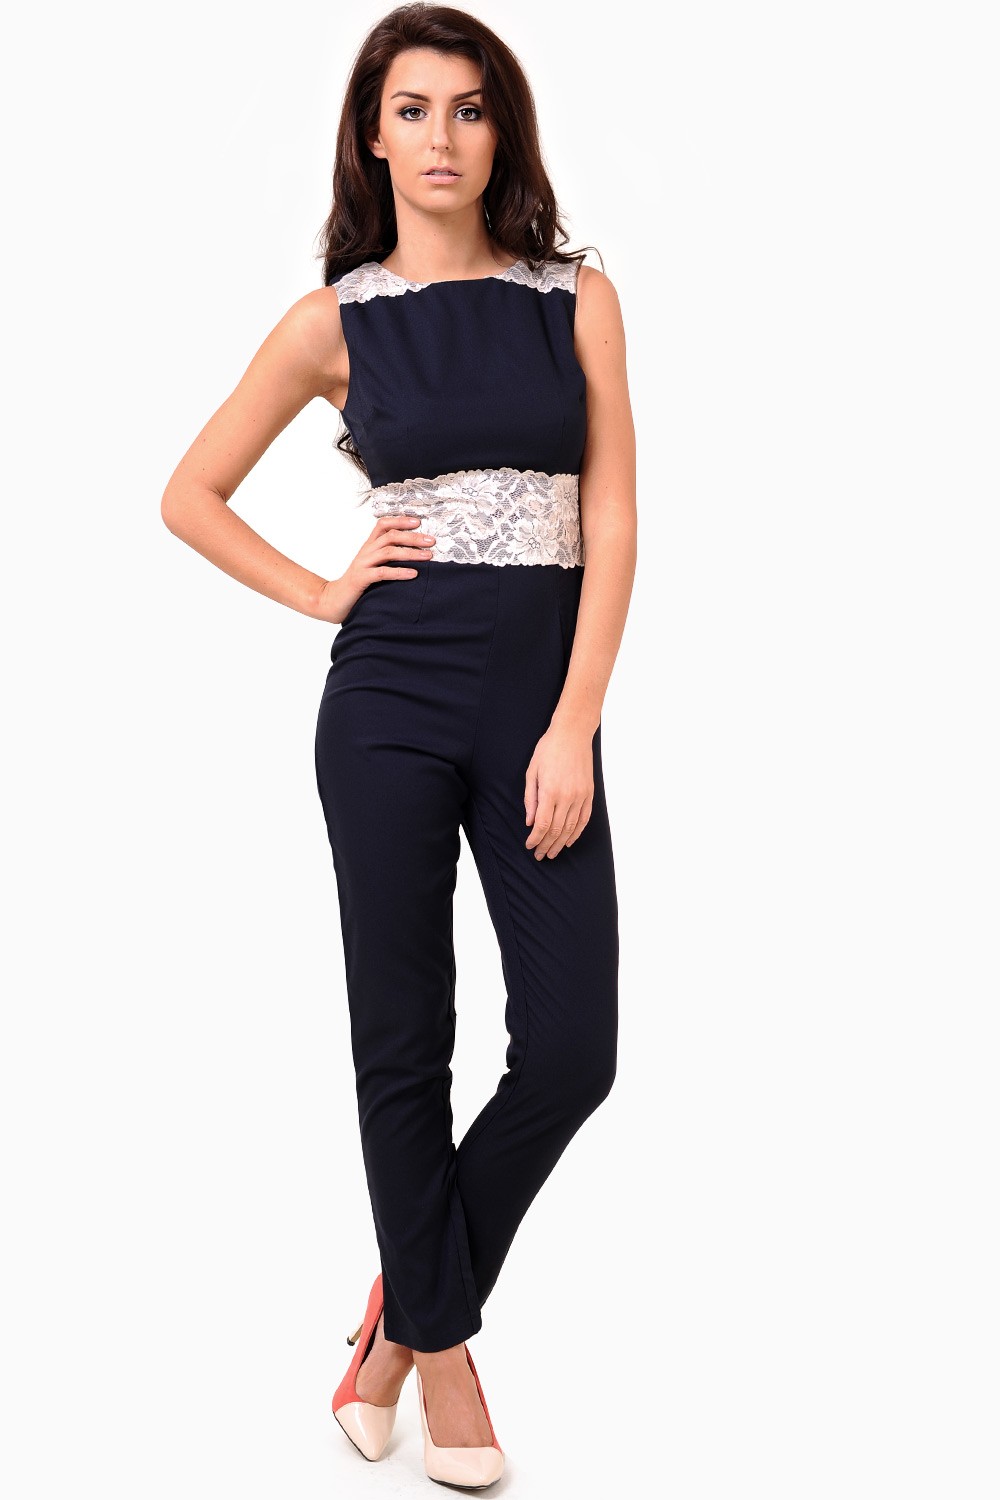 AX Paris Gillian Lace Contrast Jumpsuit in Navy | iCLOTHING